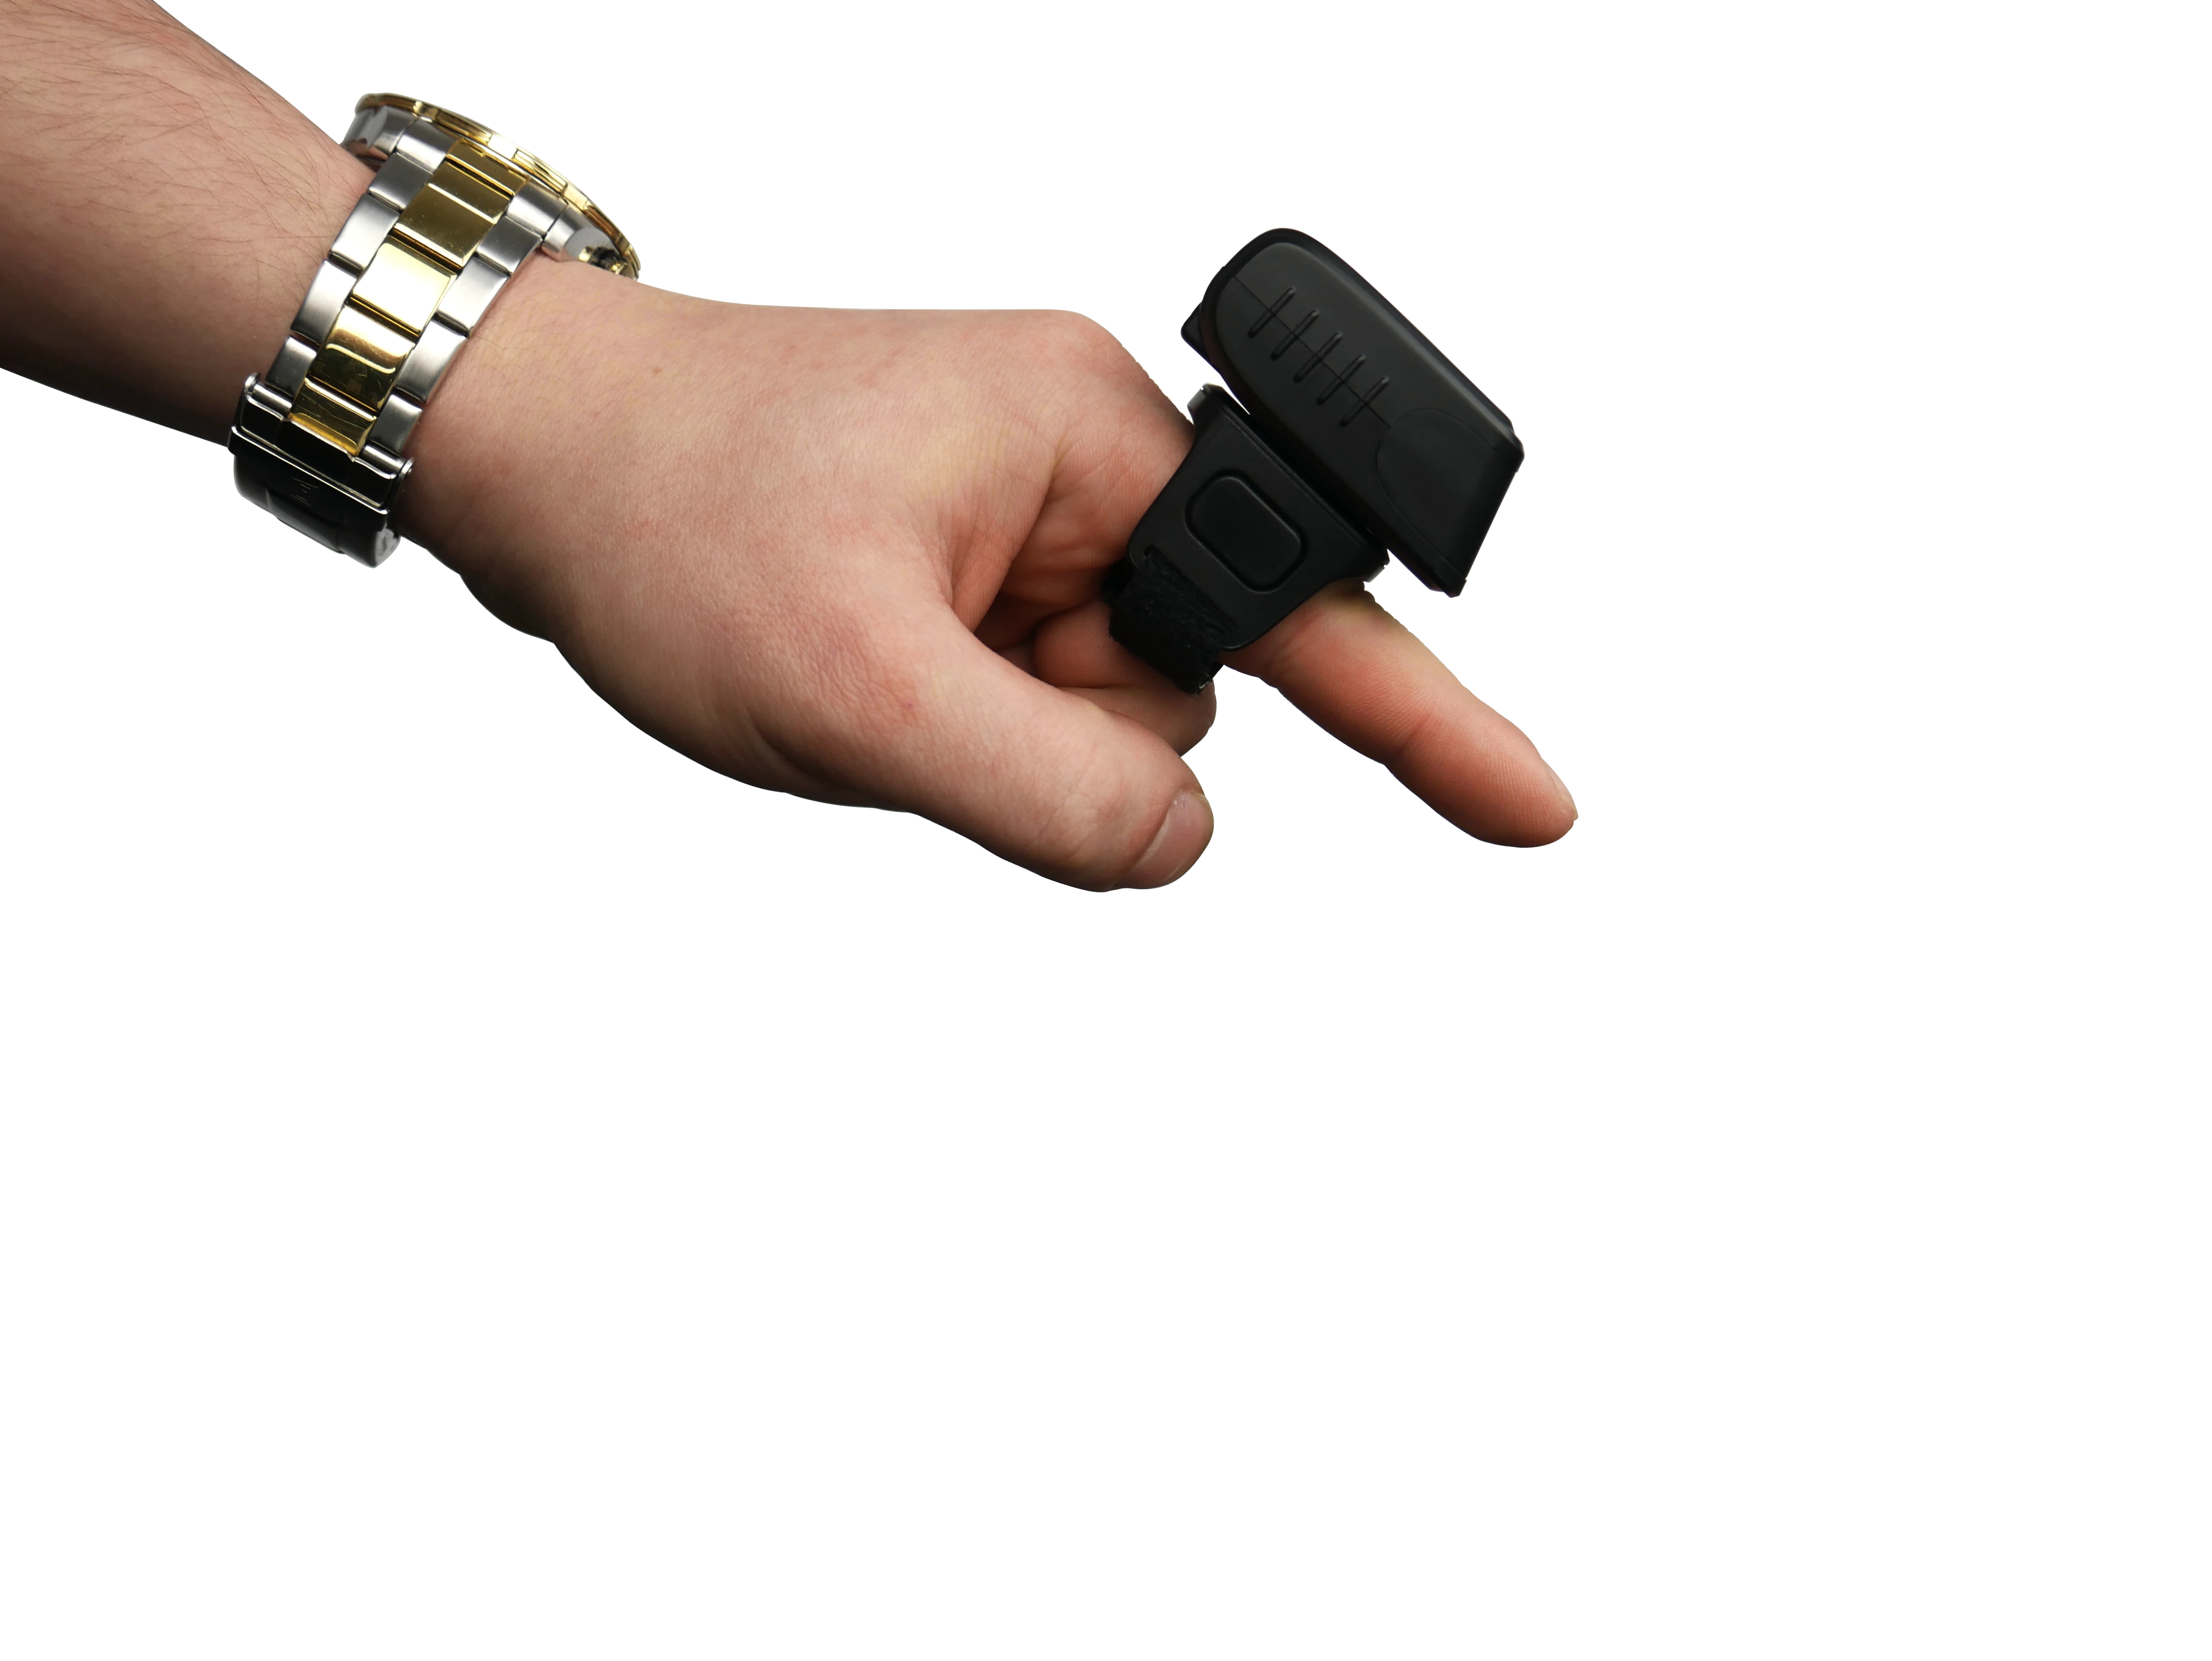 Small barcode reader for wearing on the finger